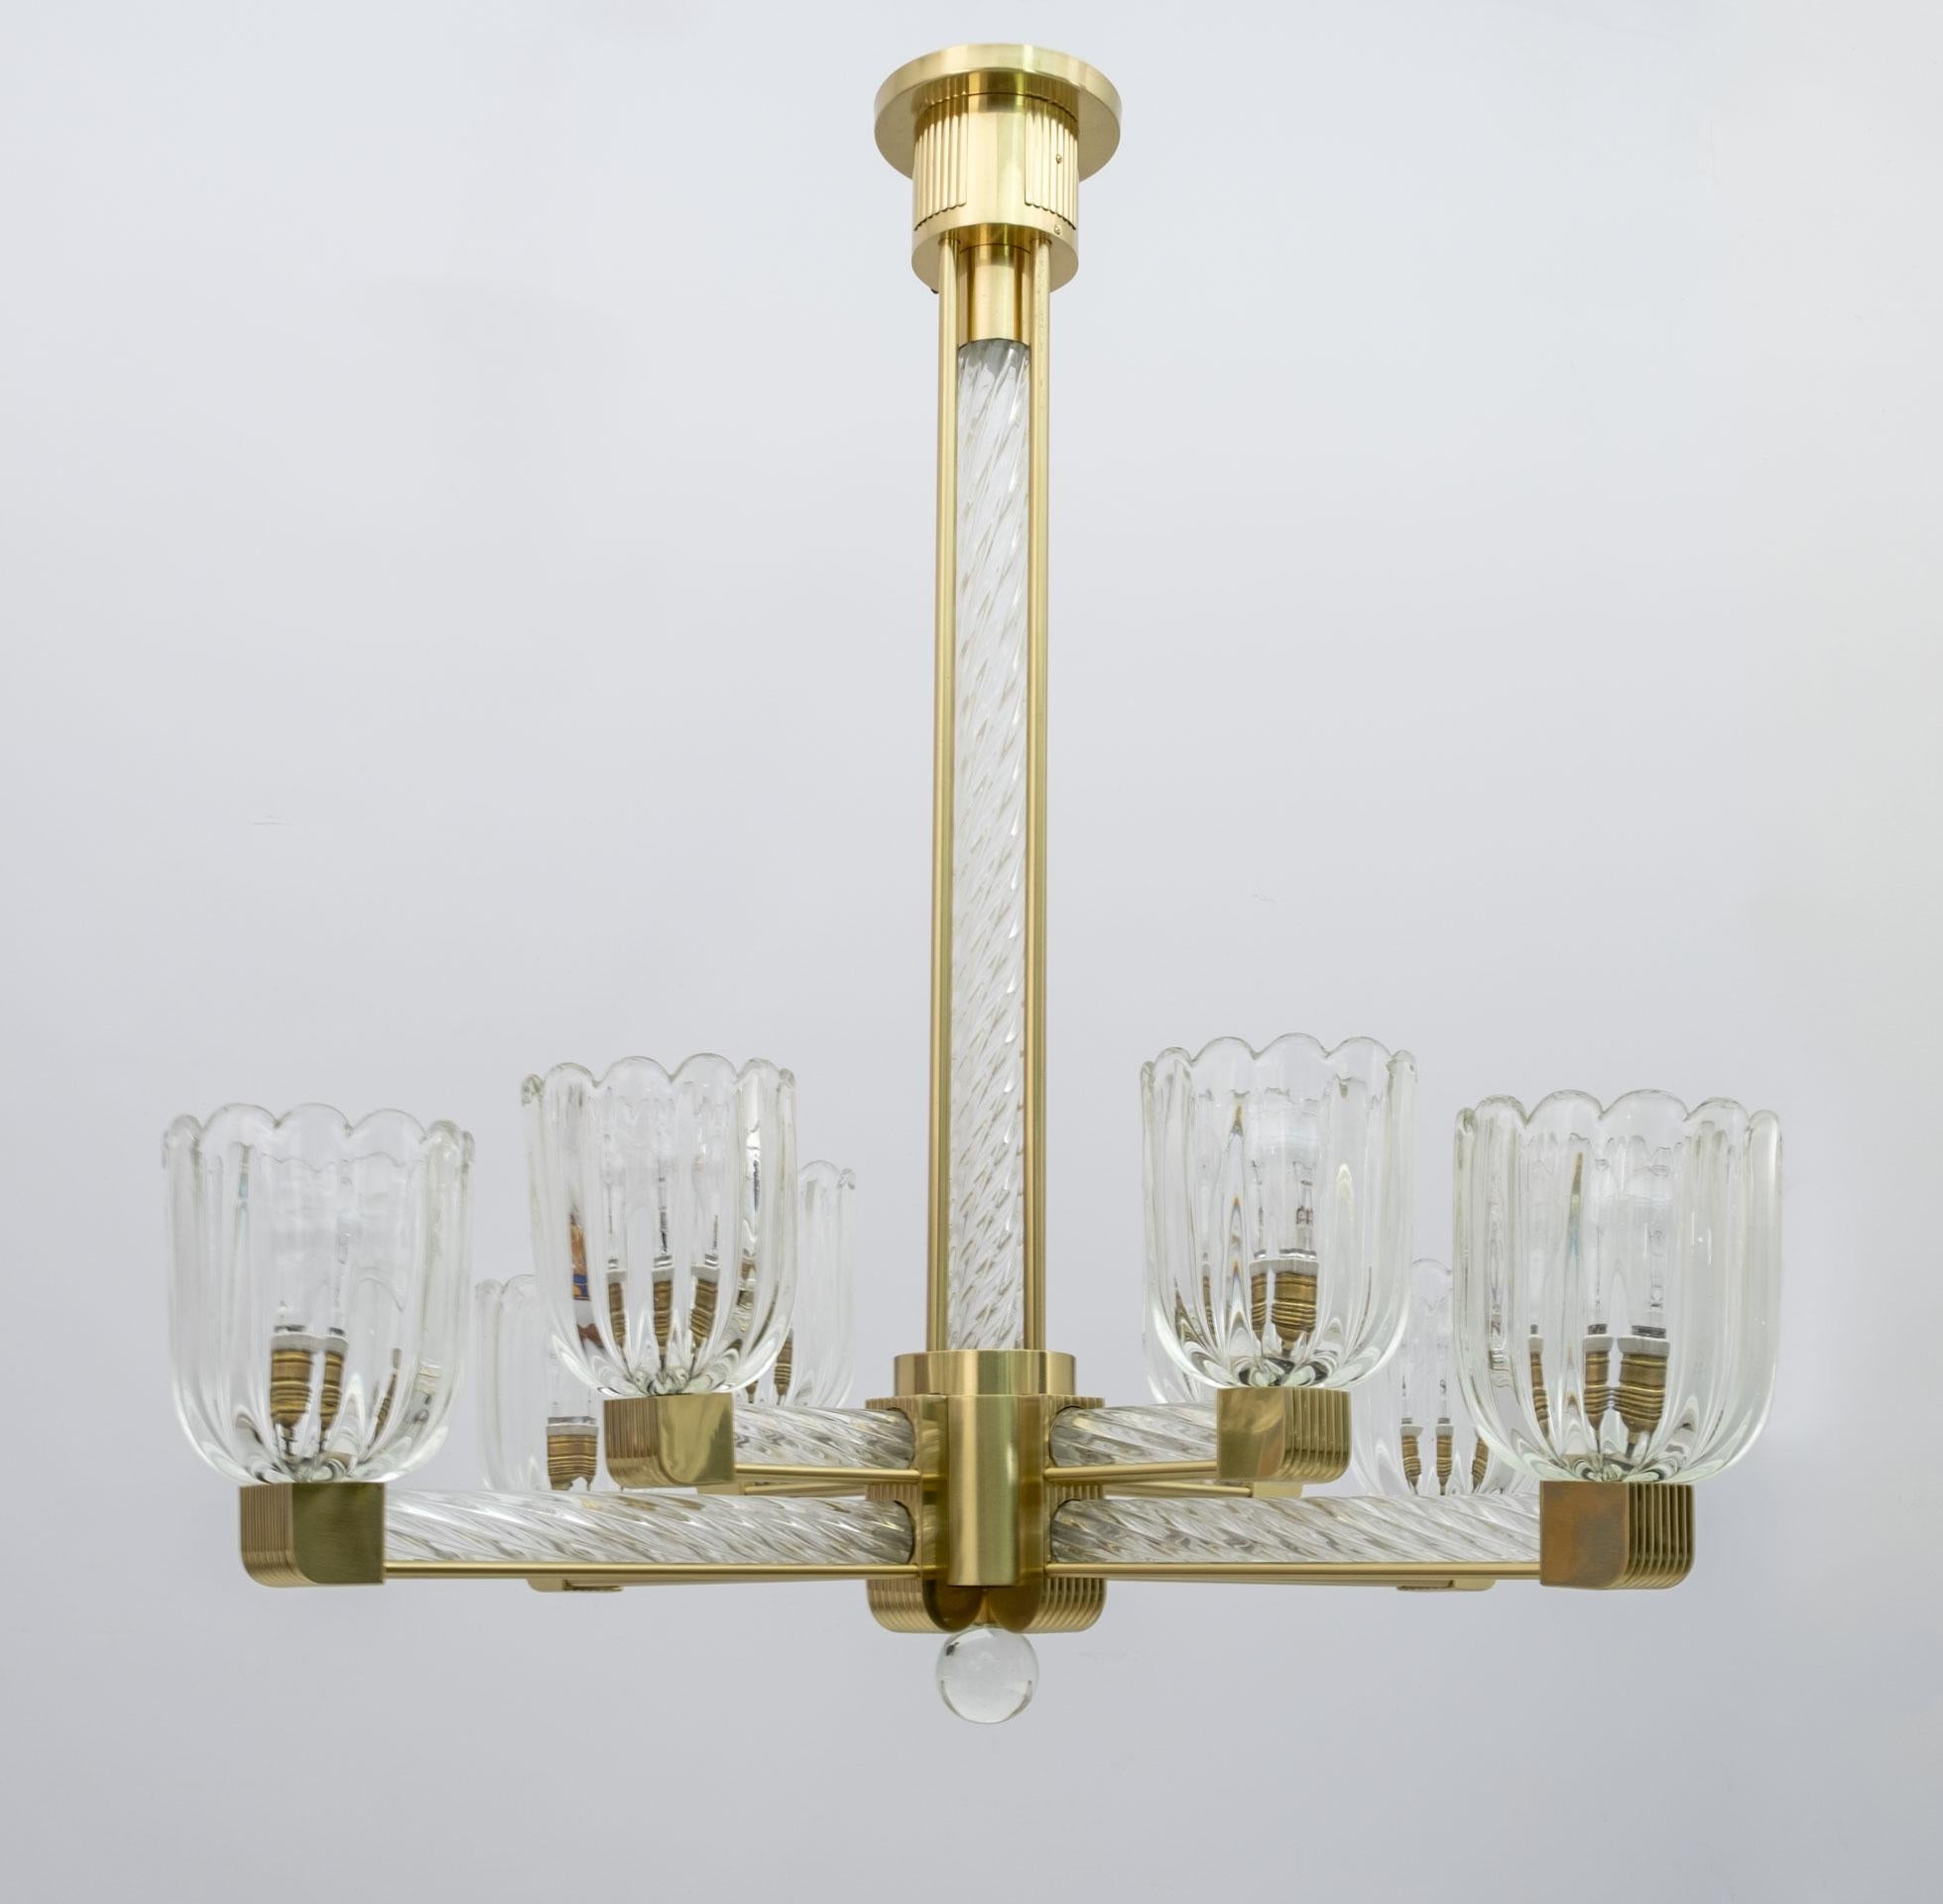 Refined and rare eight-light chandelier from the Art Deco period with transparent Murano glass by Barovier & Toso for Sciolari Lumi D'Arte Roma.
In the photo you can see how the chandelier looked before the restoration.
The chandelier has been